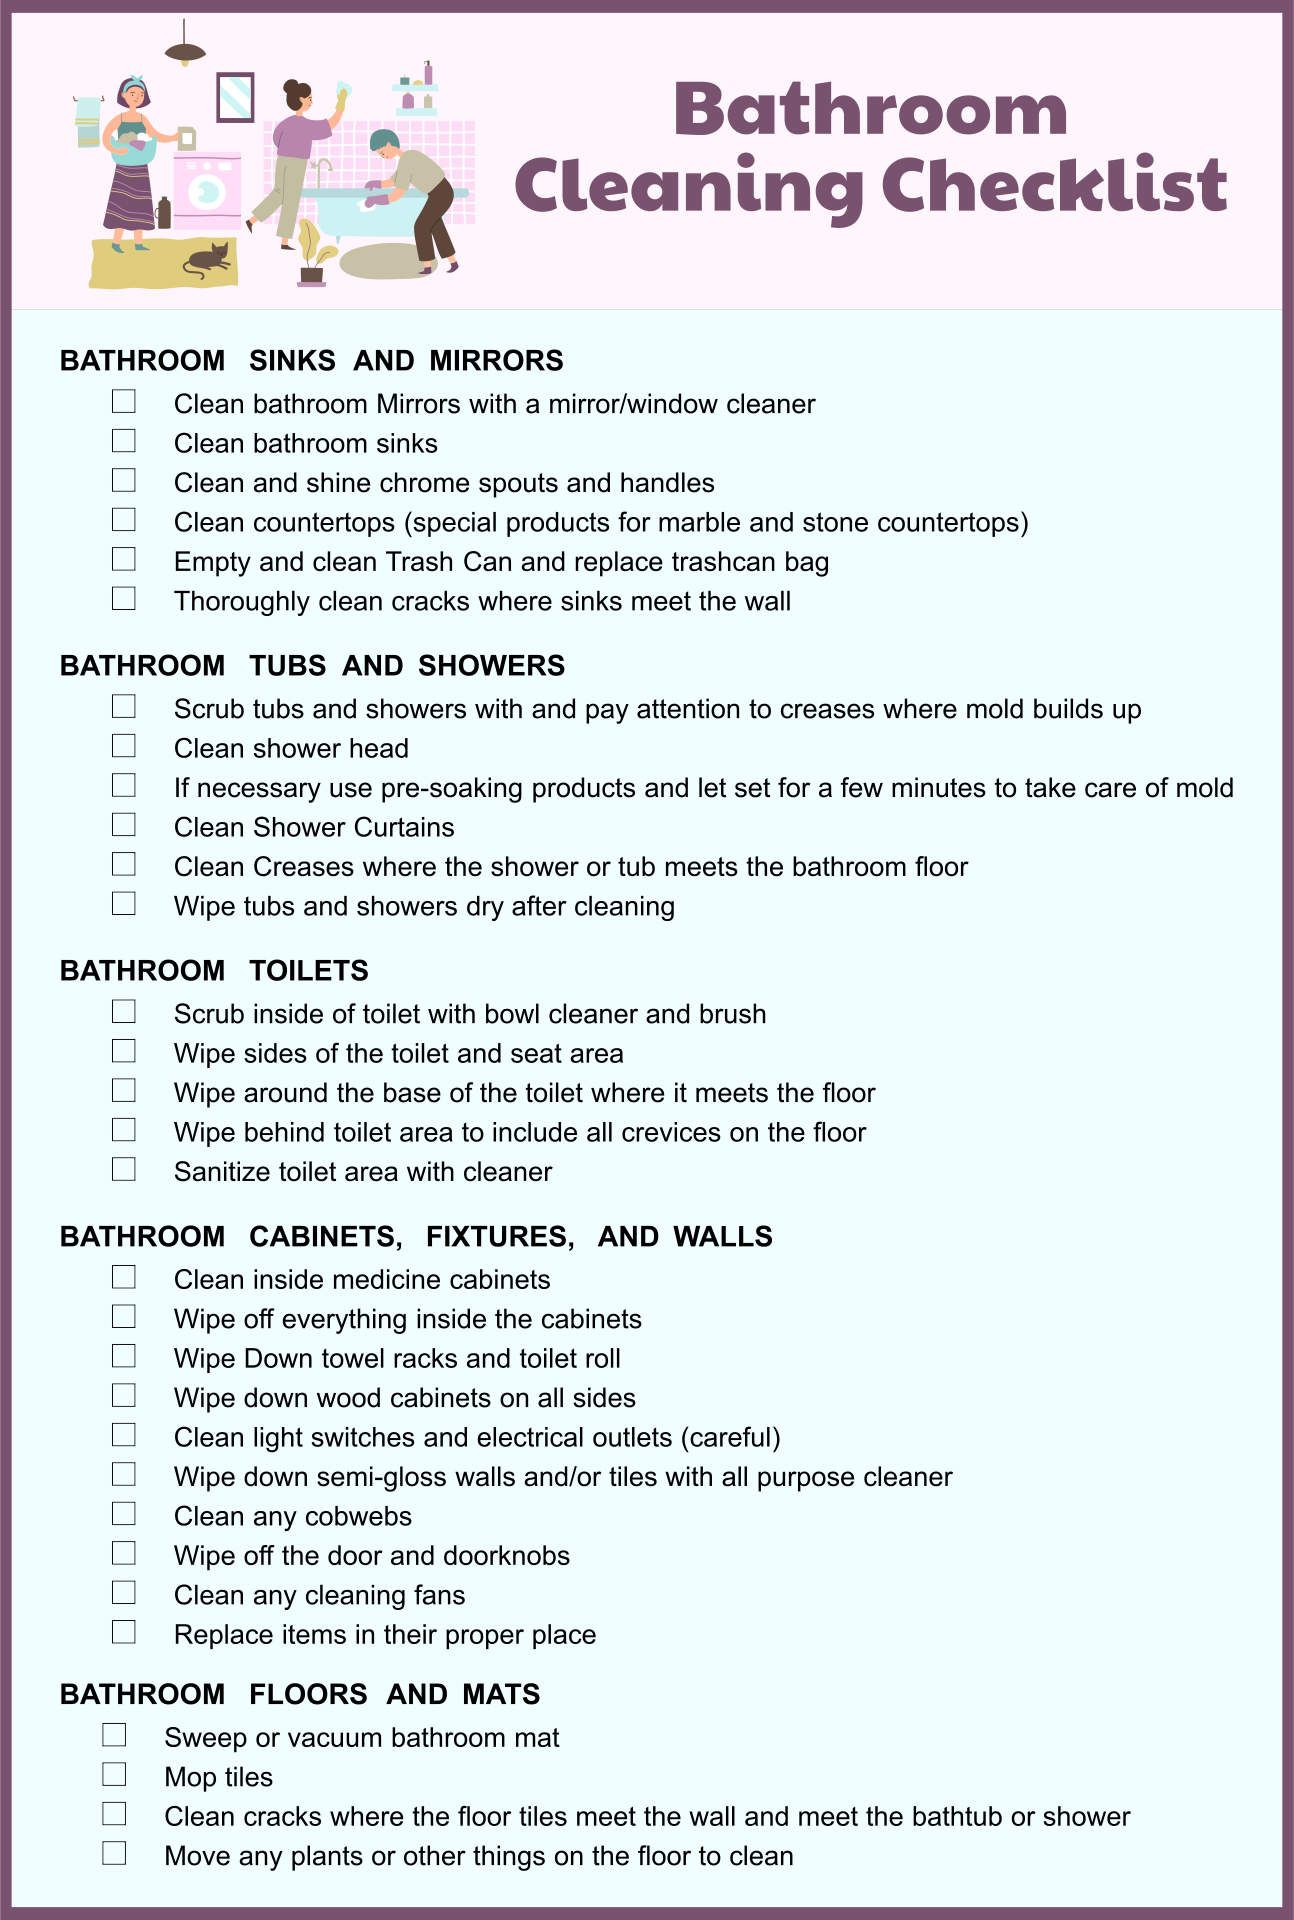 8 Best Images Of Restroom Cleaning Schedule Printable Daily Bathroom Cleaning Checklist Free 